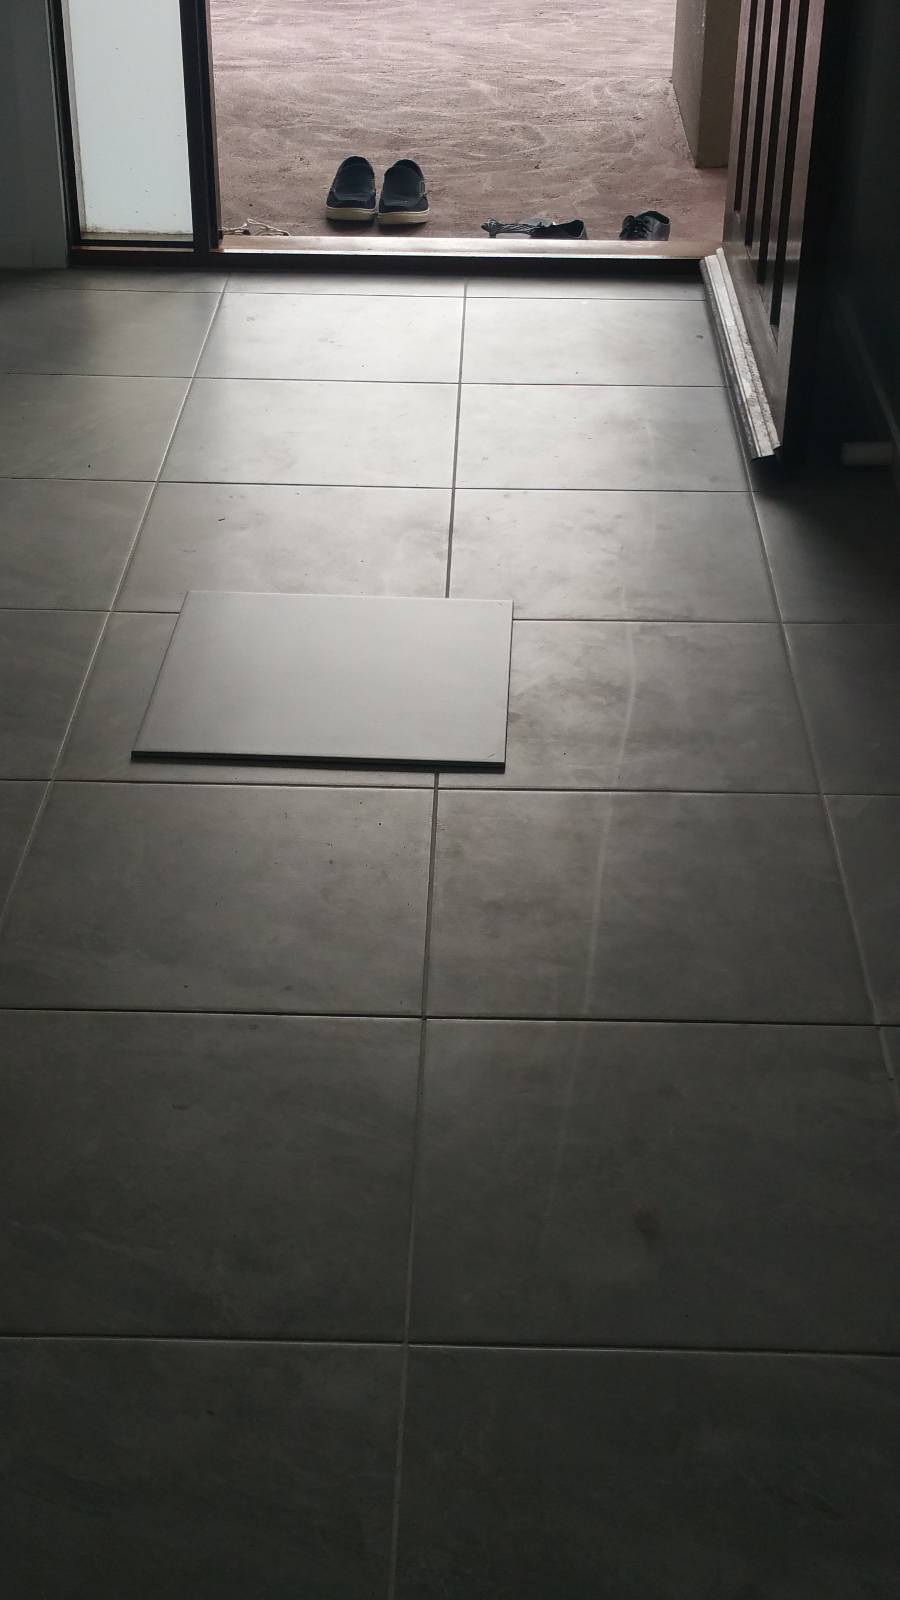 Tile flooring looks dirty - how to resolve?